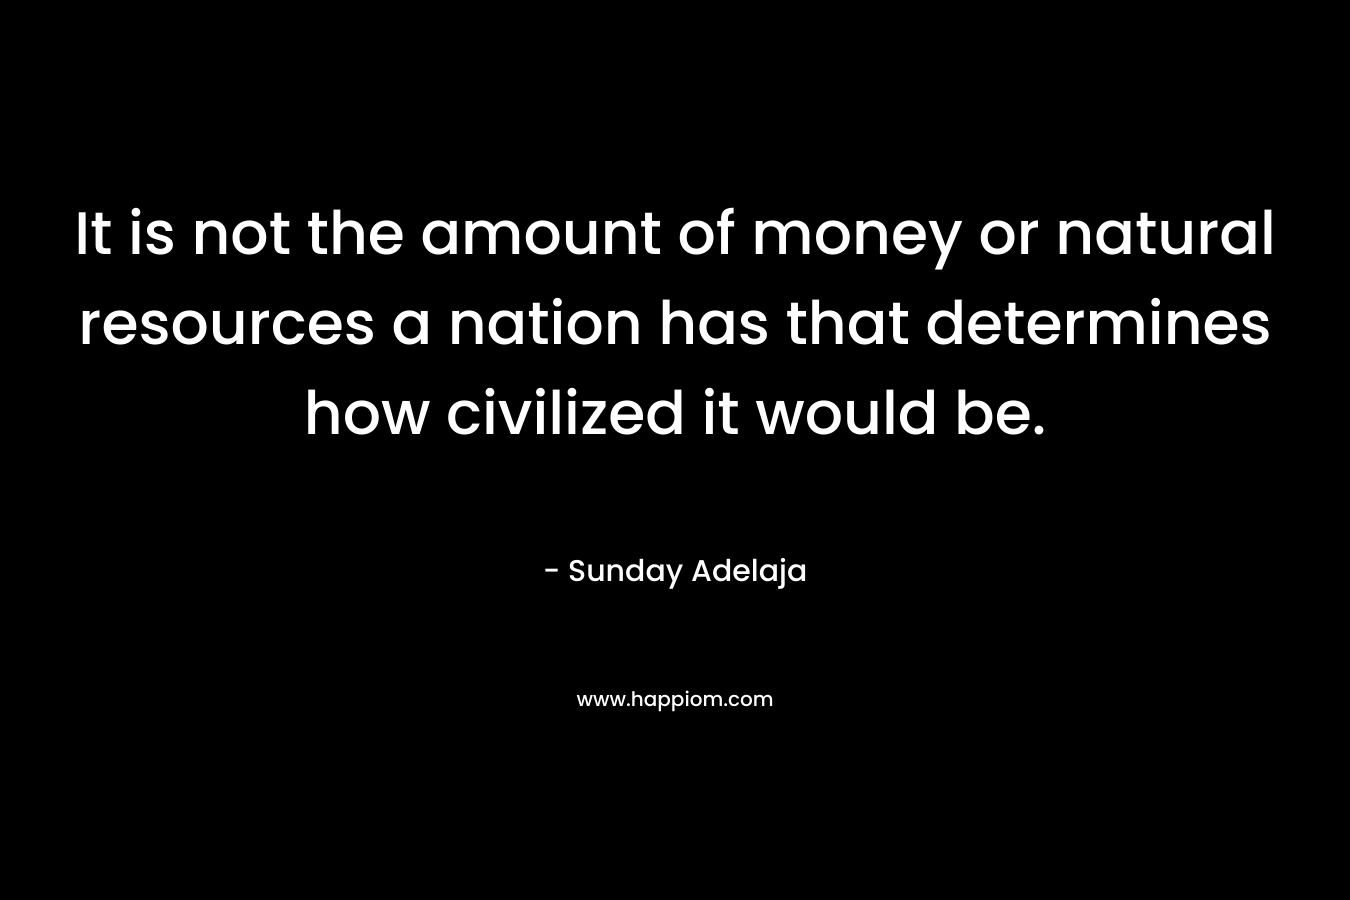 It is not the amount of money or natural resources a nation has that determines how civilized it would be.